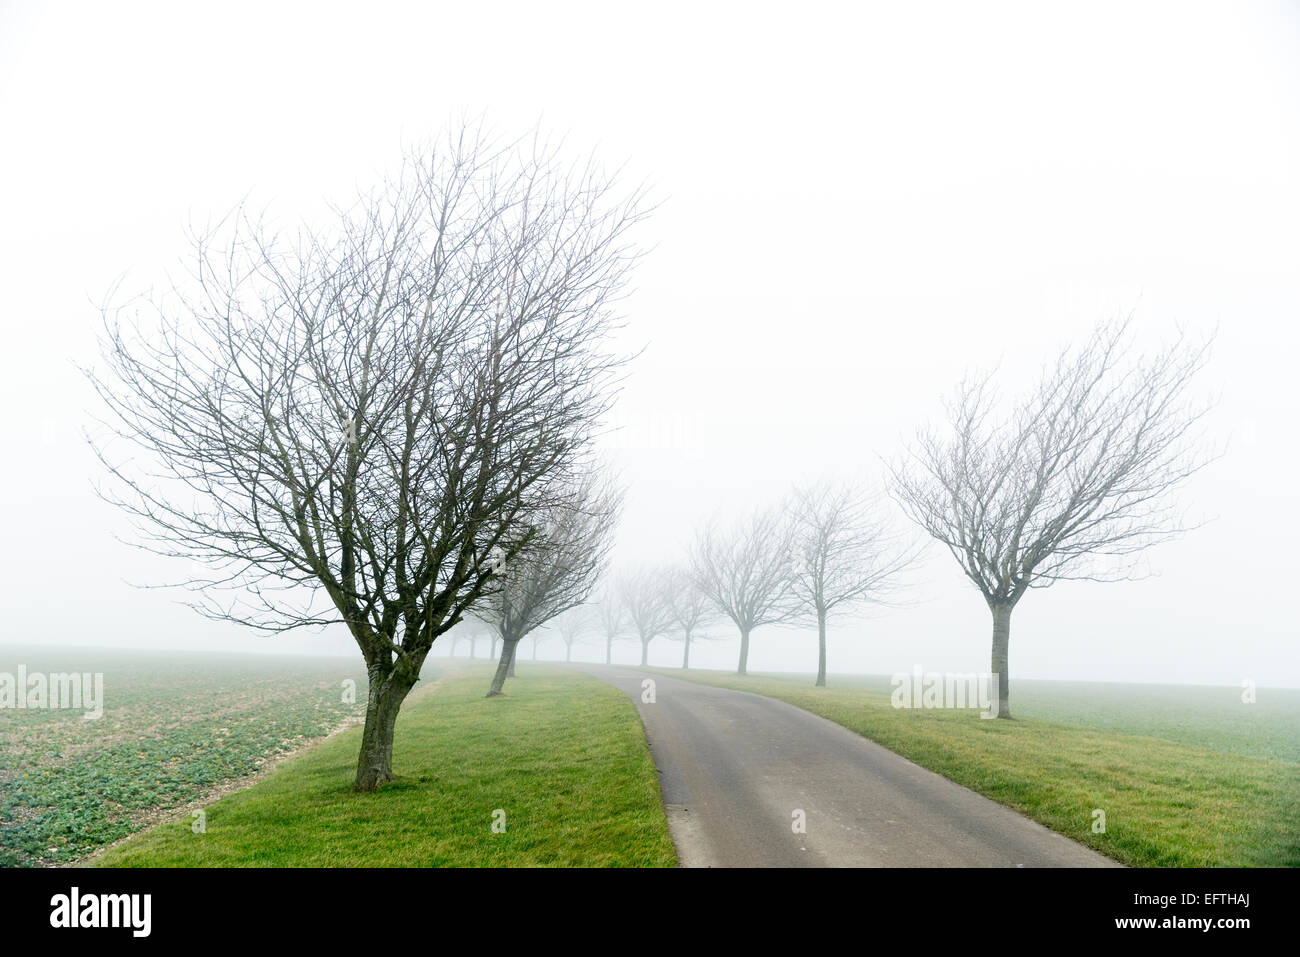 Cherry trees at Huggate on the Yorkshire Wolds in mid-winter. Stock Photo